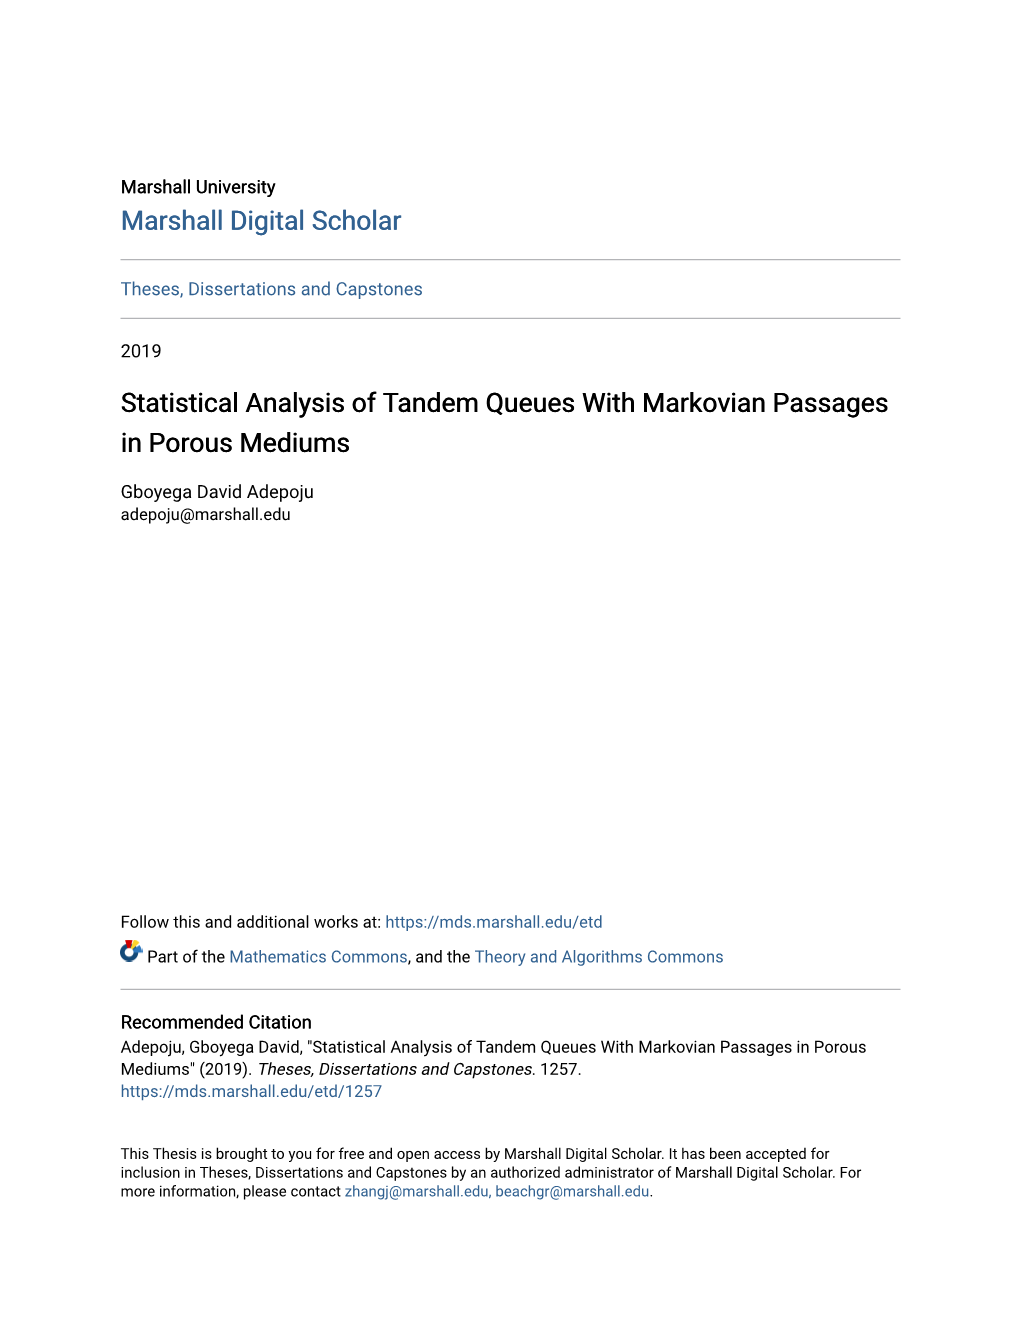 Statistical Analysis of Tandem Queues with Markovian Passages in Porous Mediums